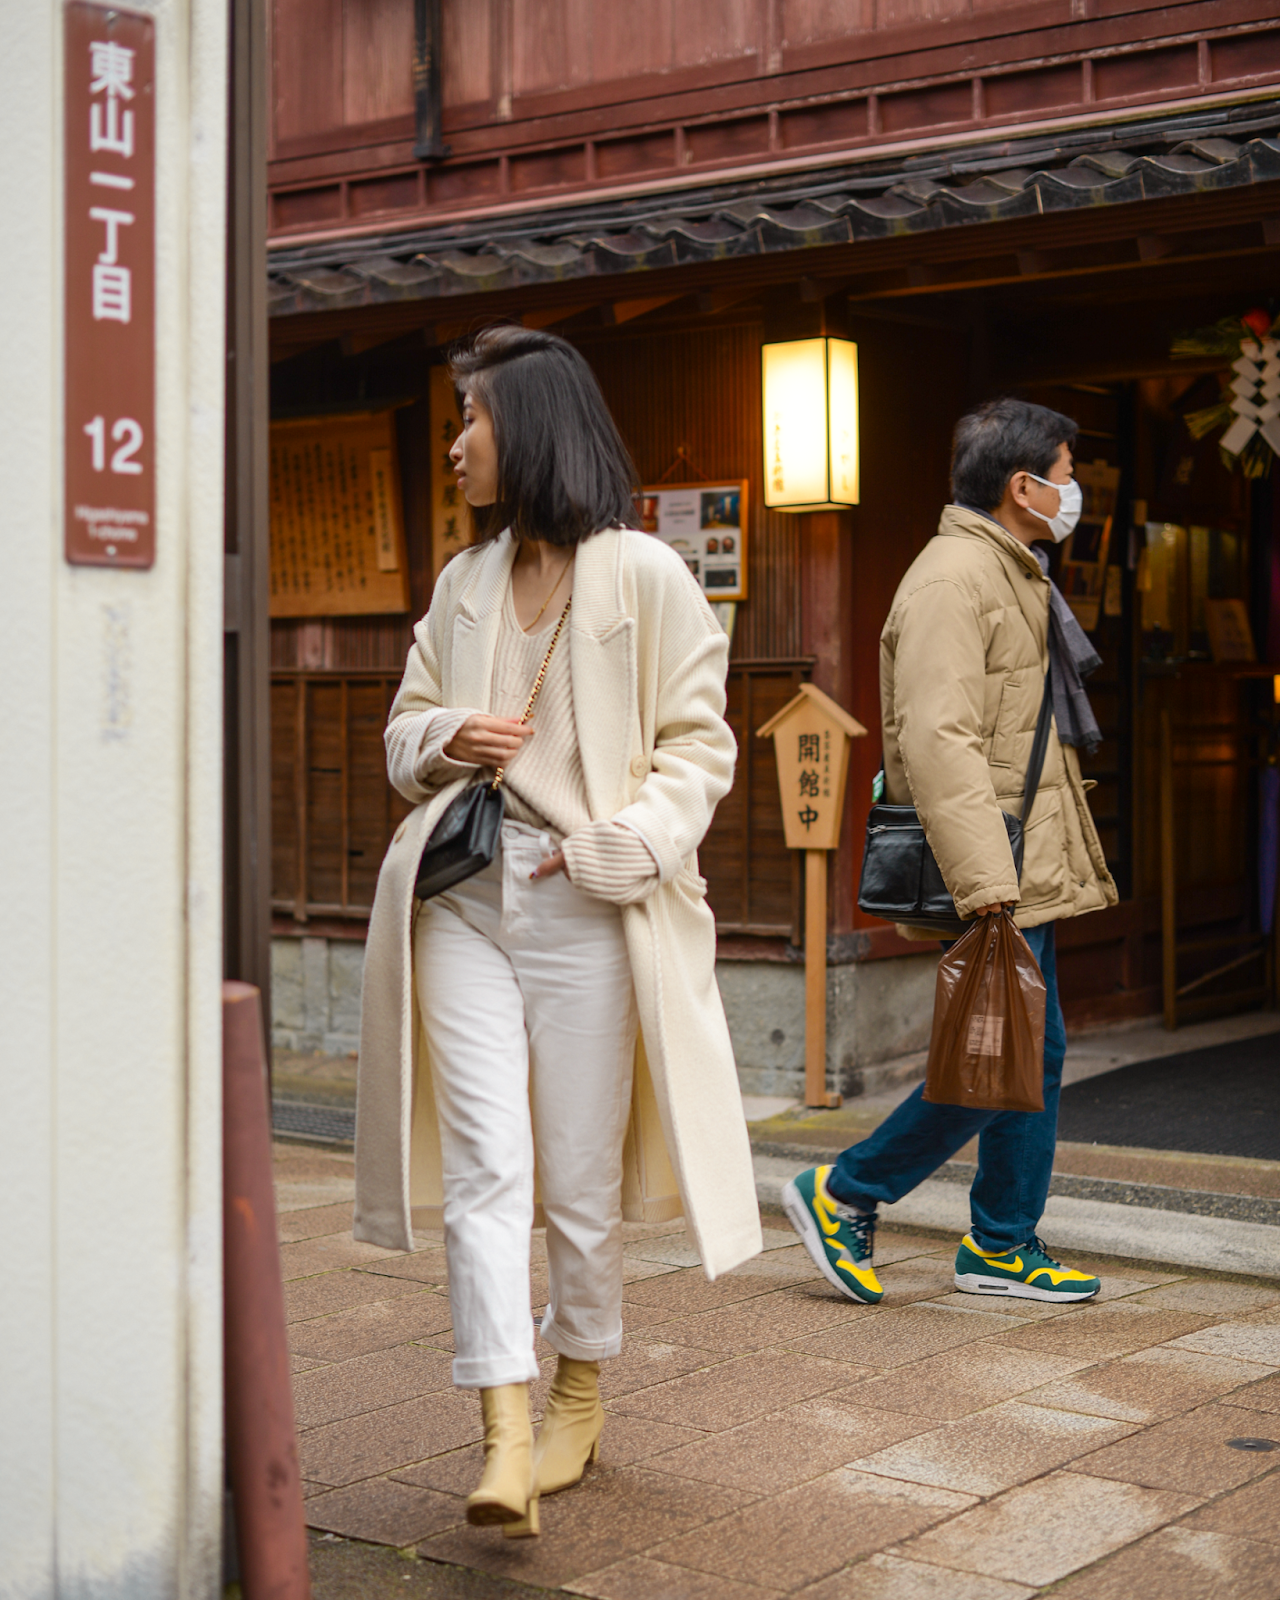 Gold town, Kanazawa trip from Tokyo, must-visit cities in Japan, Nishi Chaya District, Higashi Chaya District, photogenic and charming towns in Japan - FOREVERVANNY